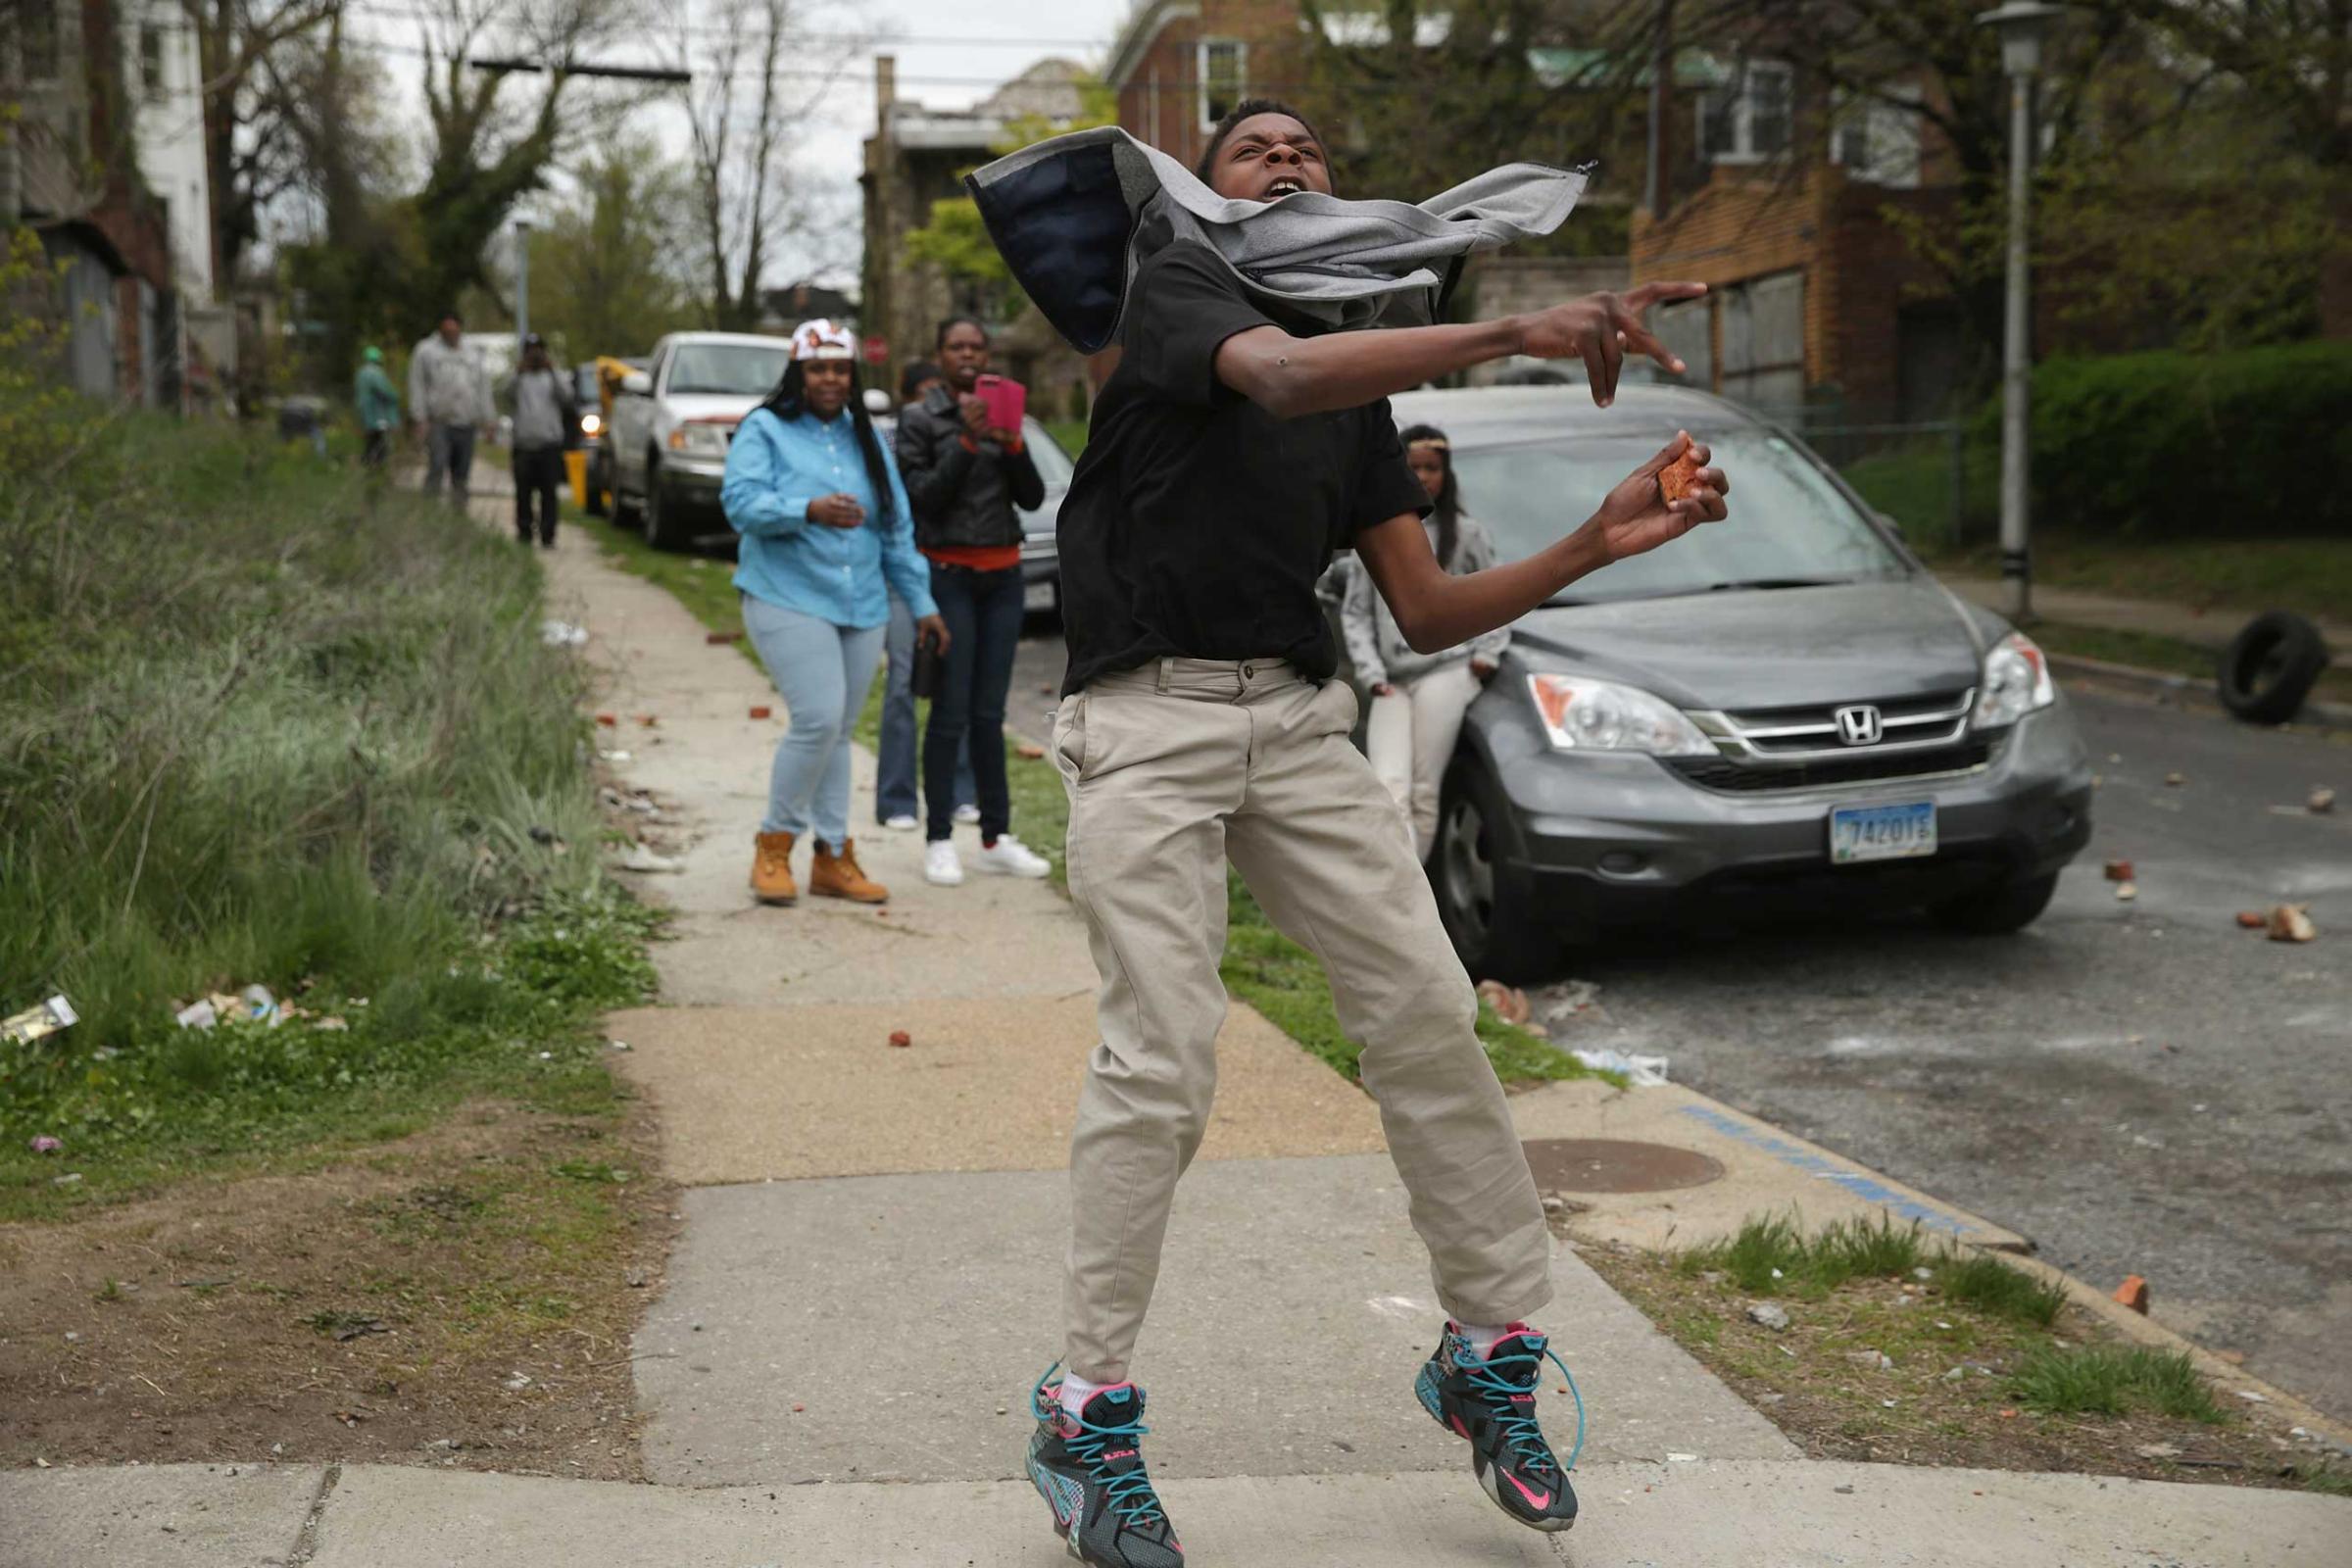 A man hurls a rock at Baltimore police officers outside the Mondawmin Mall following the funeral of Freddie Gray in Baltimore on April 27, 2015.